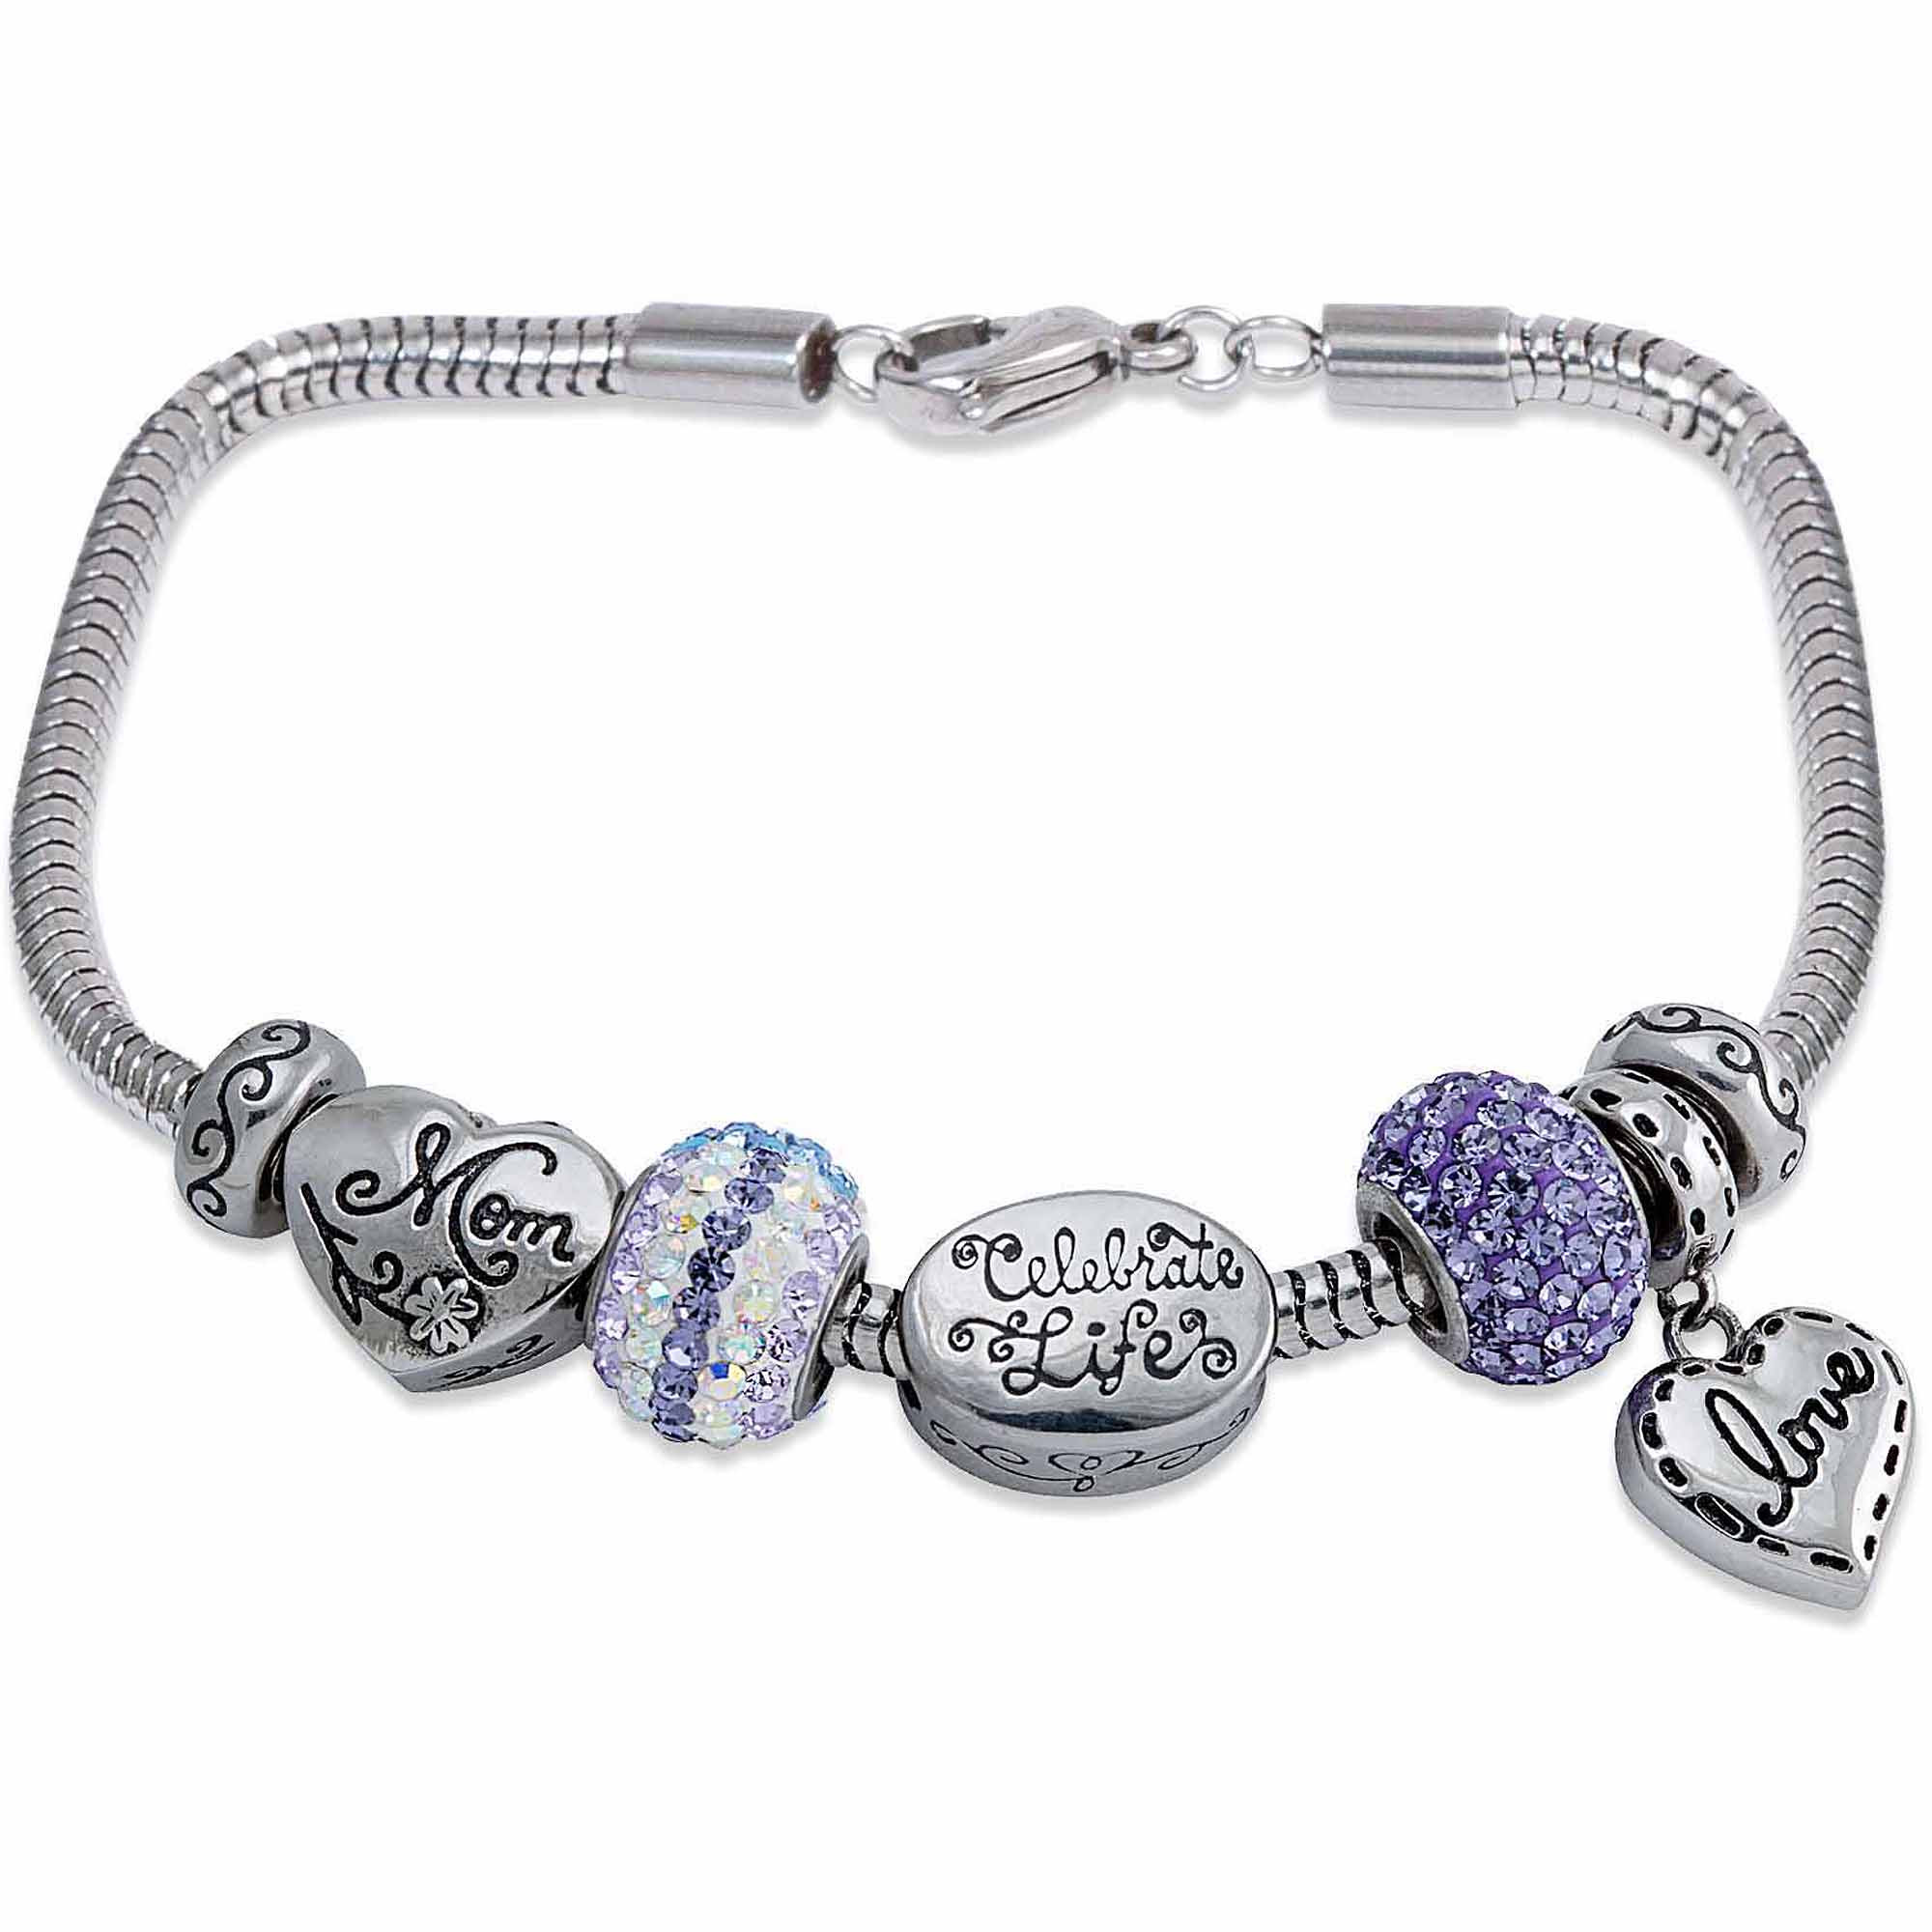 Walmart Jewelry Bracelets
 Connections from Hallmark Stainless Steel Limited